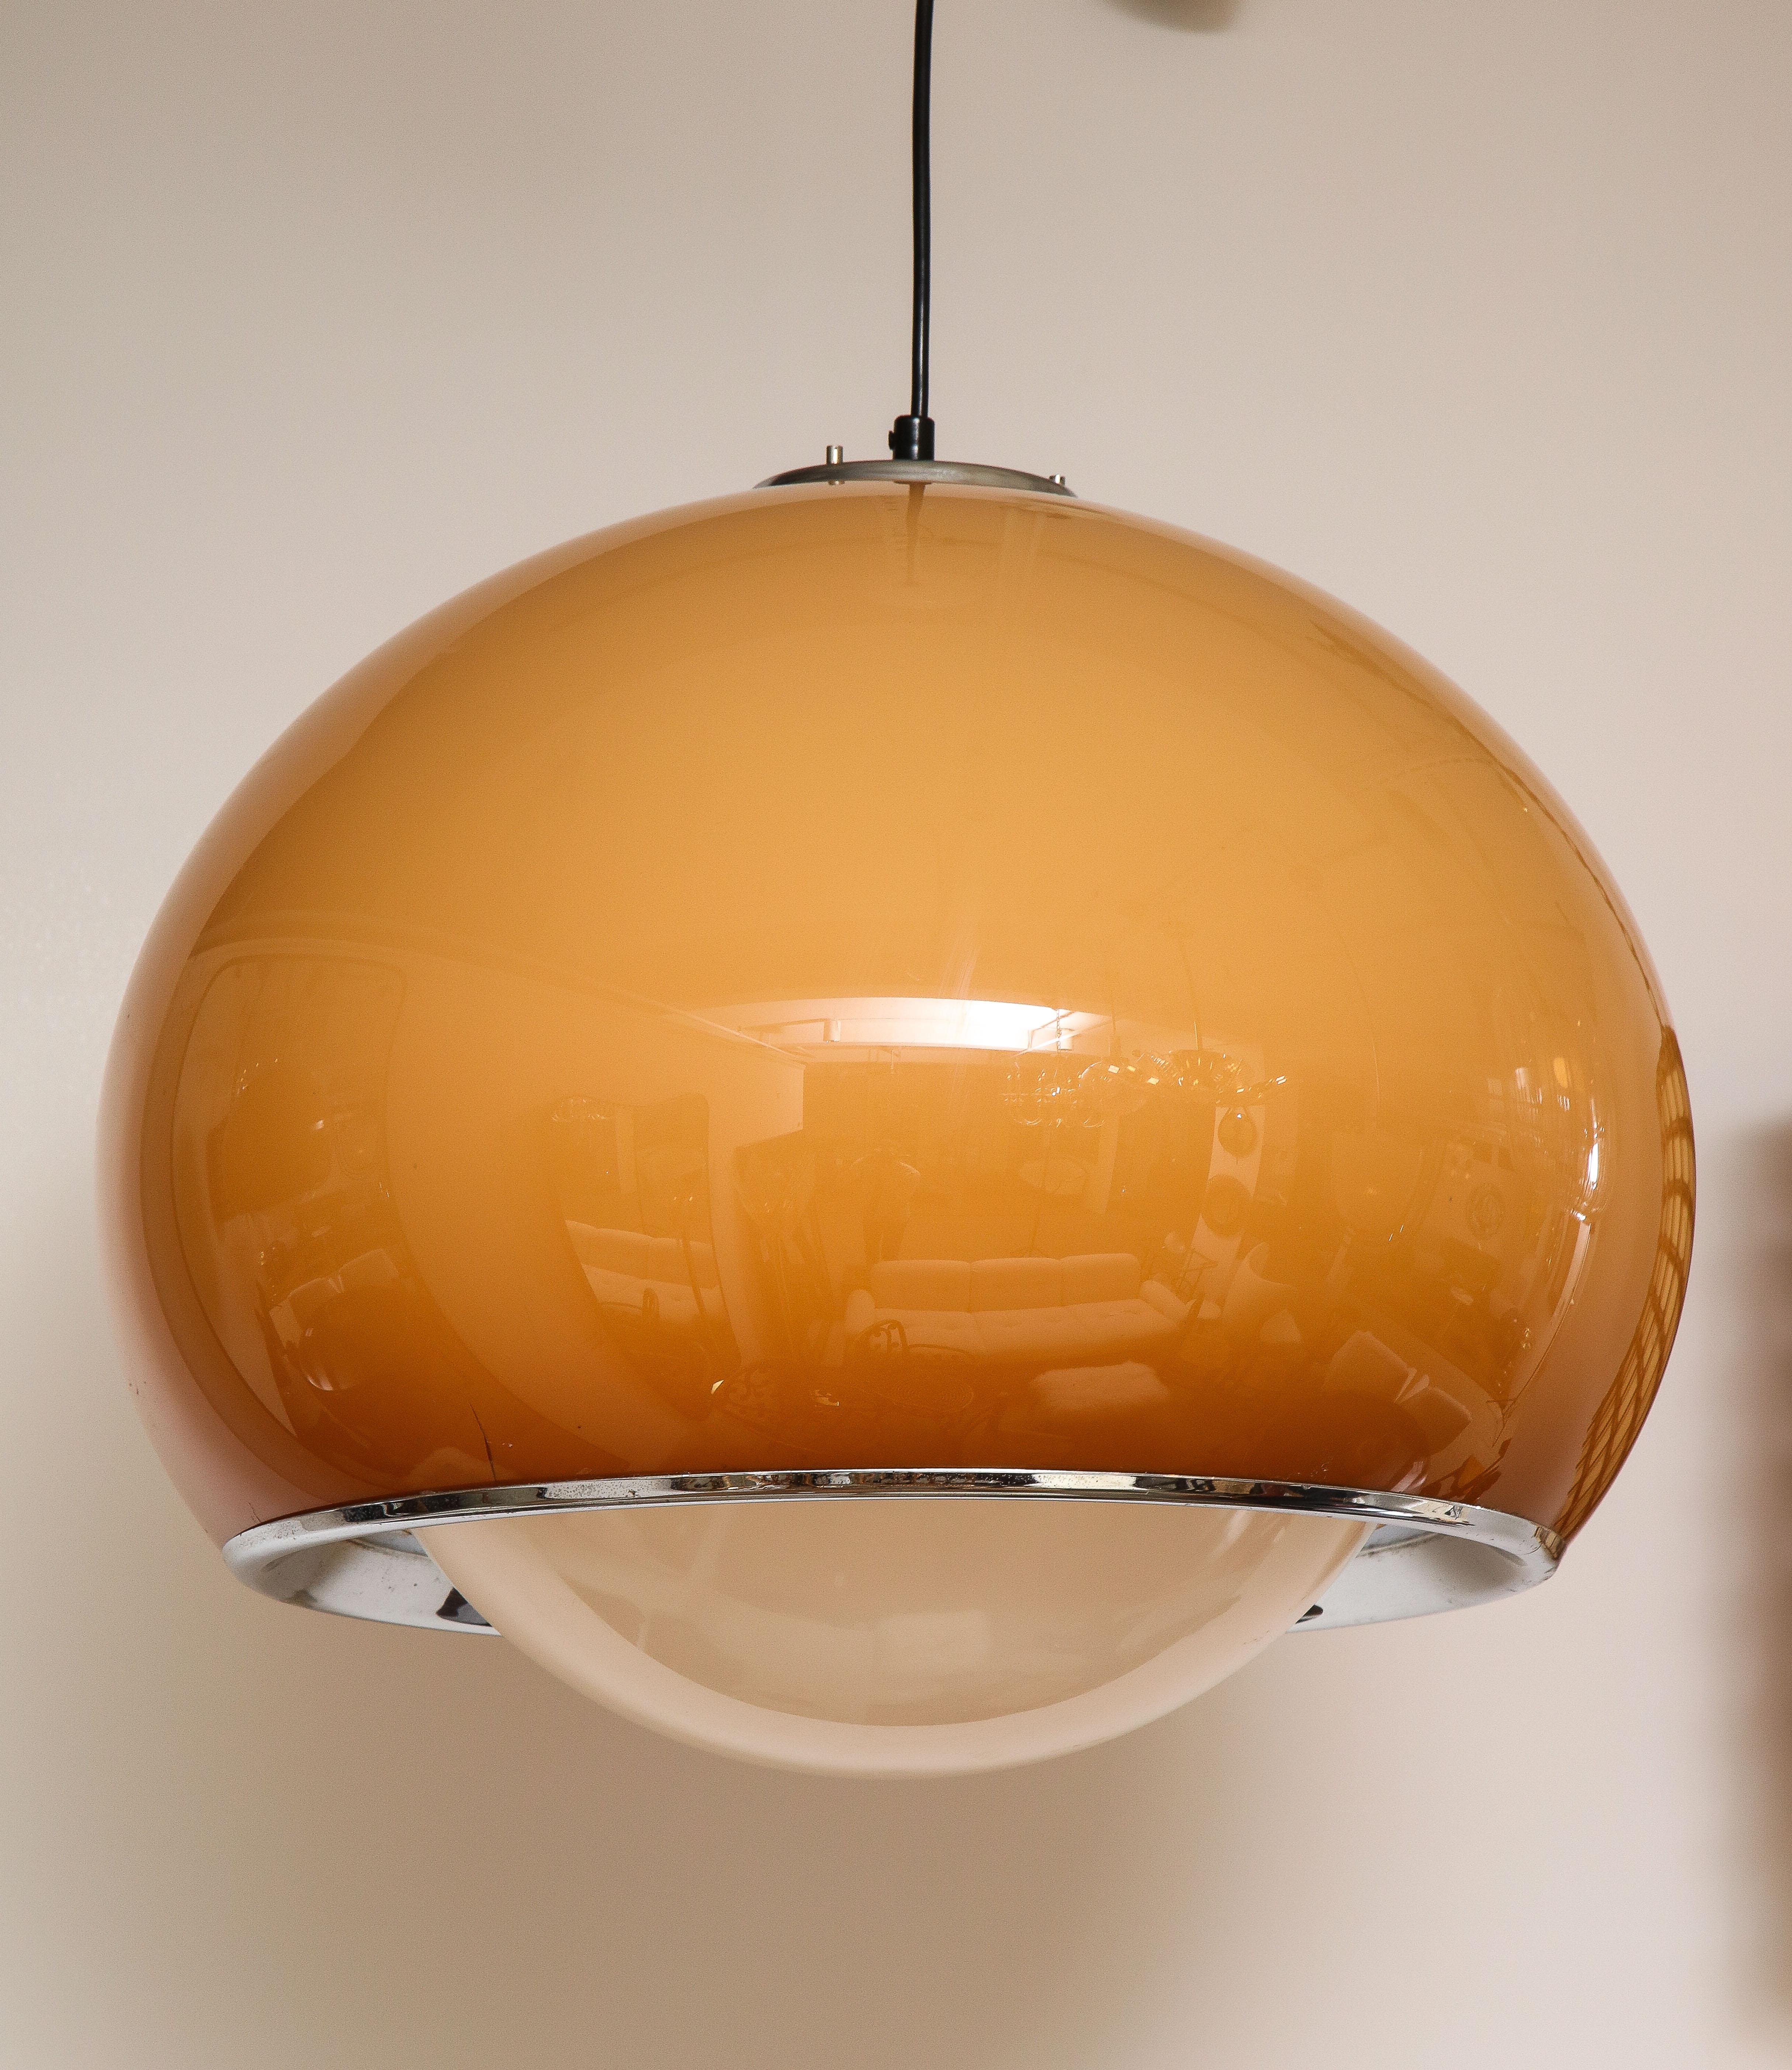 Harvey Guzzini chandelier in caramel/brown coloring, with an acrylic dome shape and original white acrylic canopy. The underside of the dome with chrome surround. Emits a beautiful warm light. Great statement piece and highly indicative of the